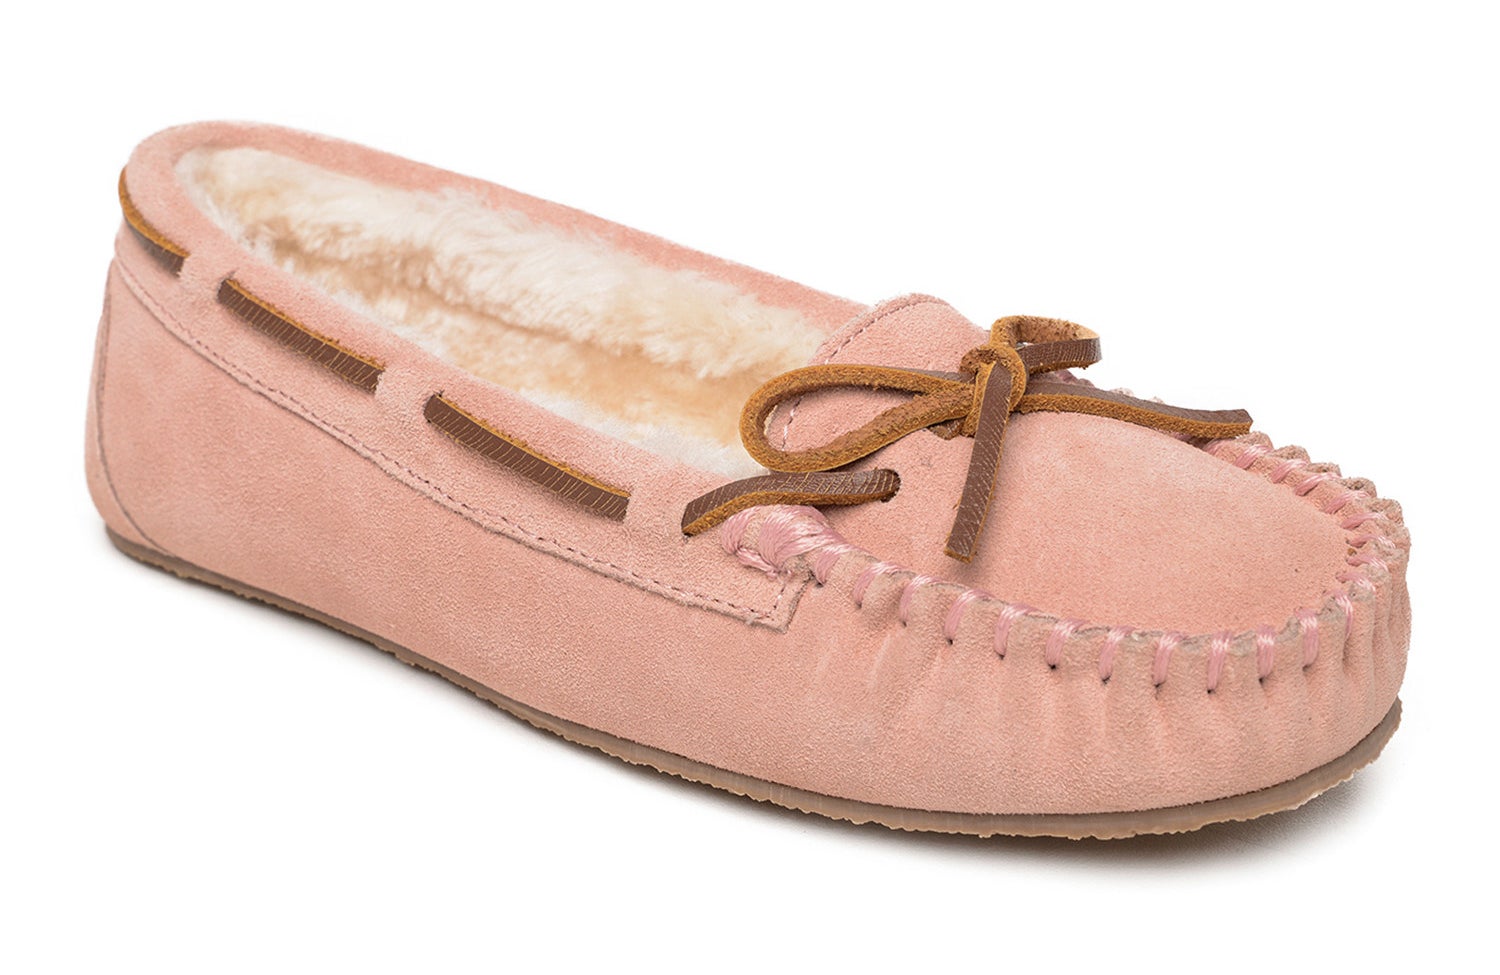 The slippers in light pink